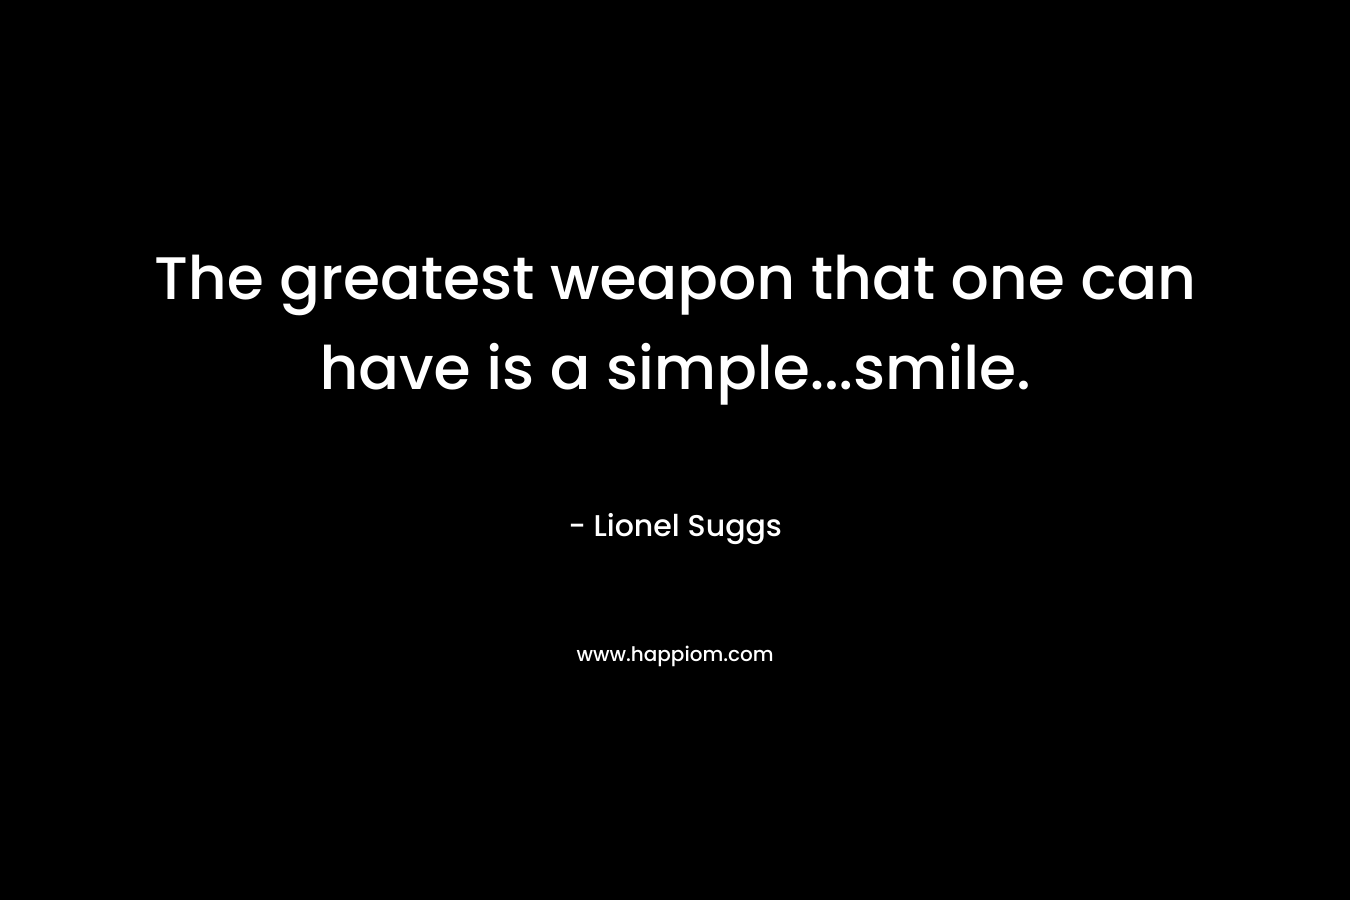 The greatest weapon that one can have is a simple...smile.